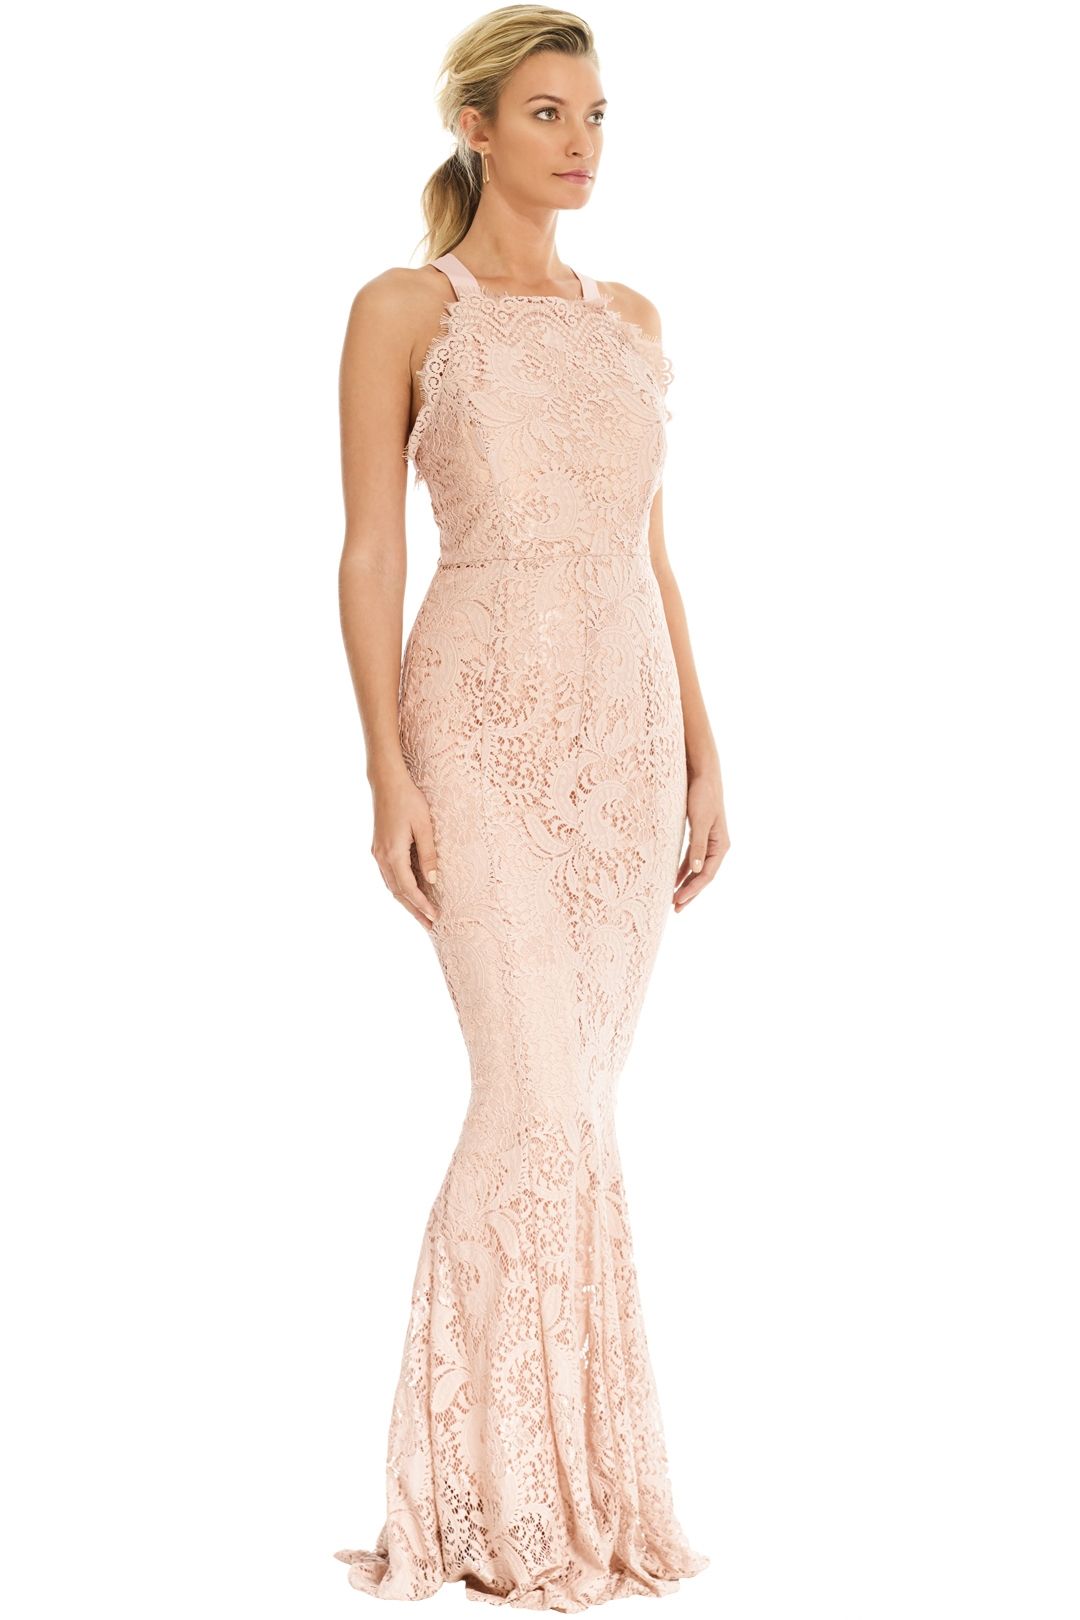 Grace and Hart - Mystic Lace Cross Back Gown - Blush - Side